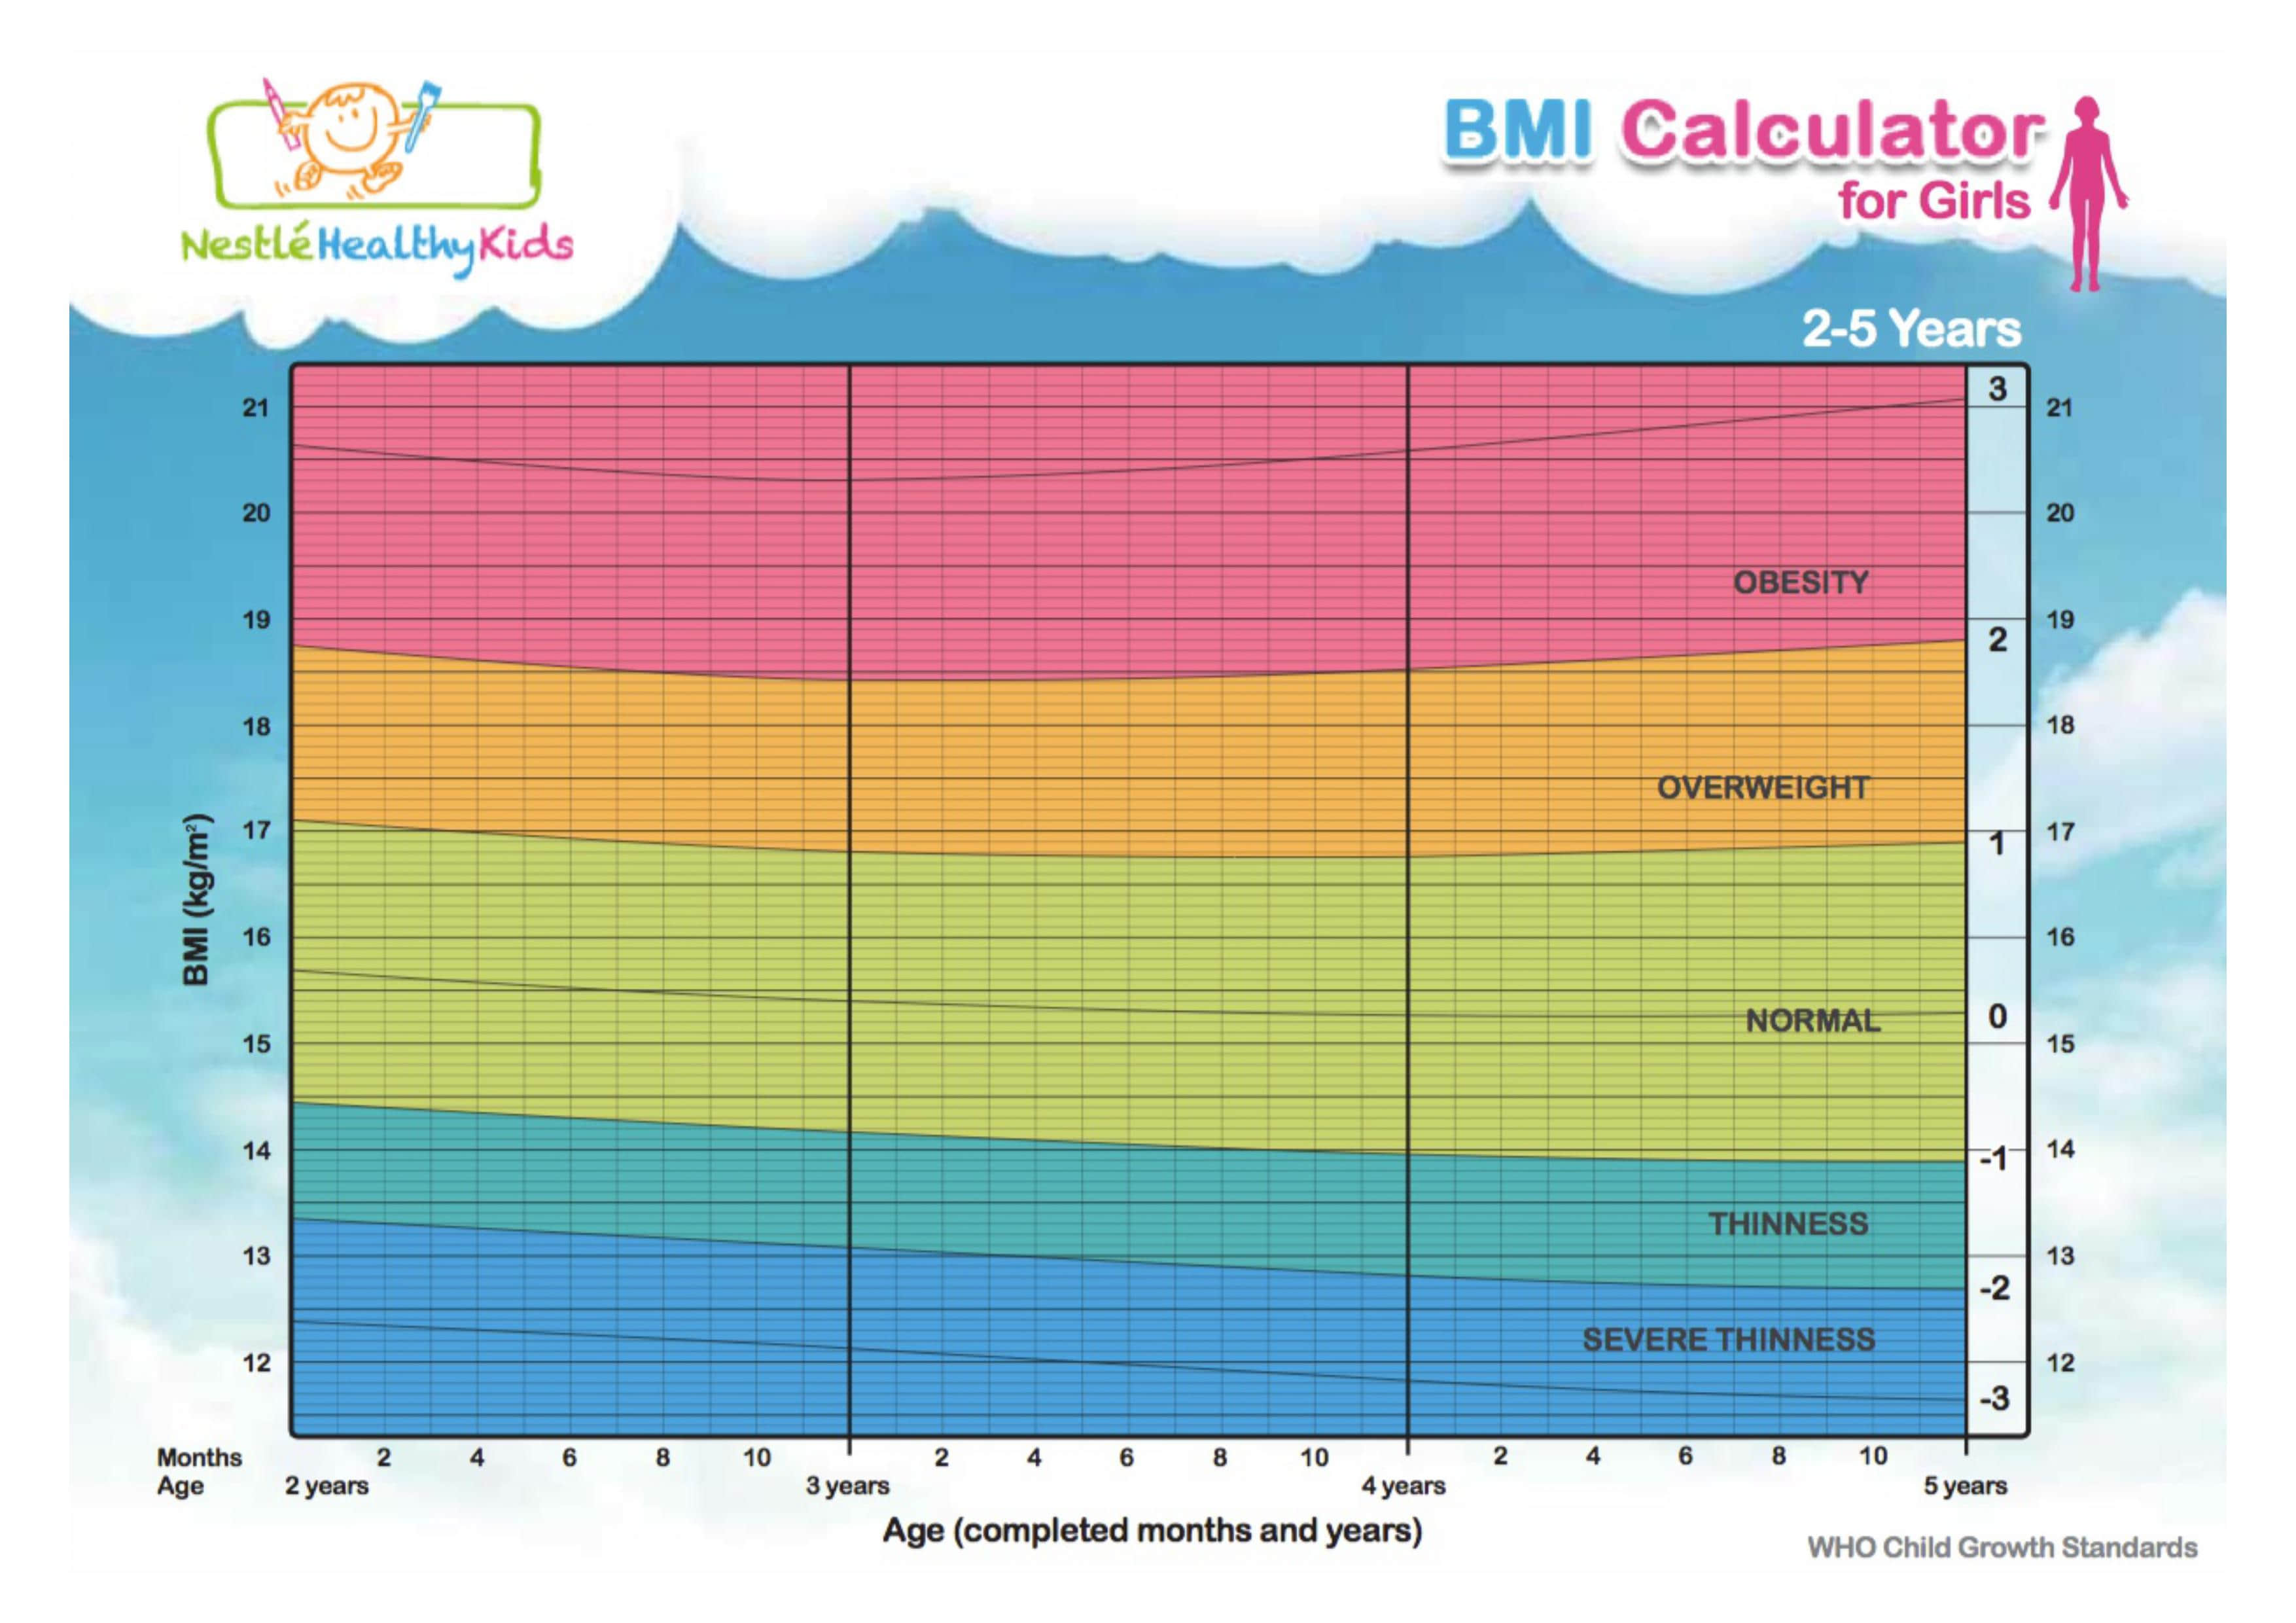 BMI Chart for girls 2-5 years old